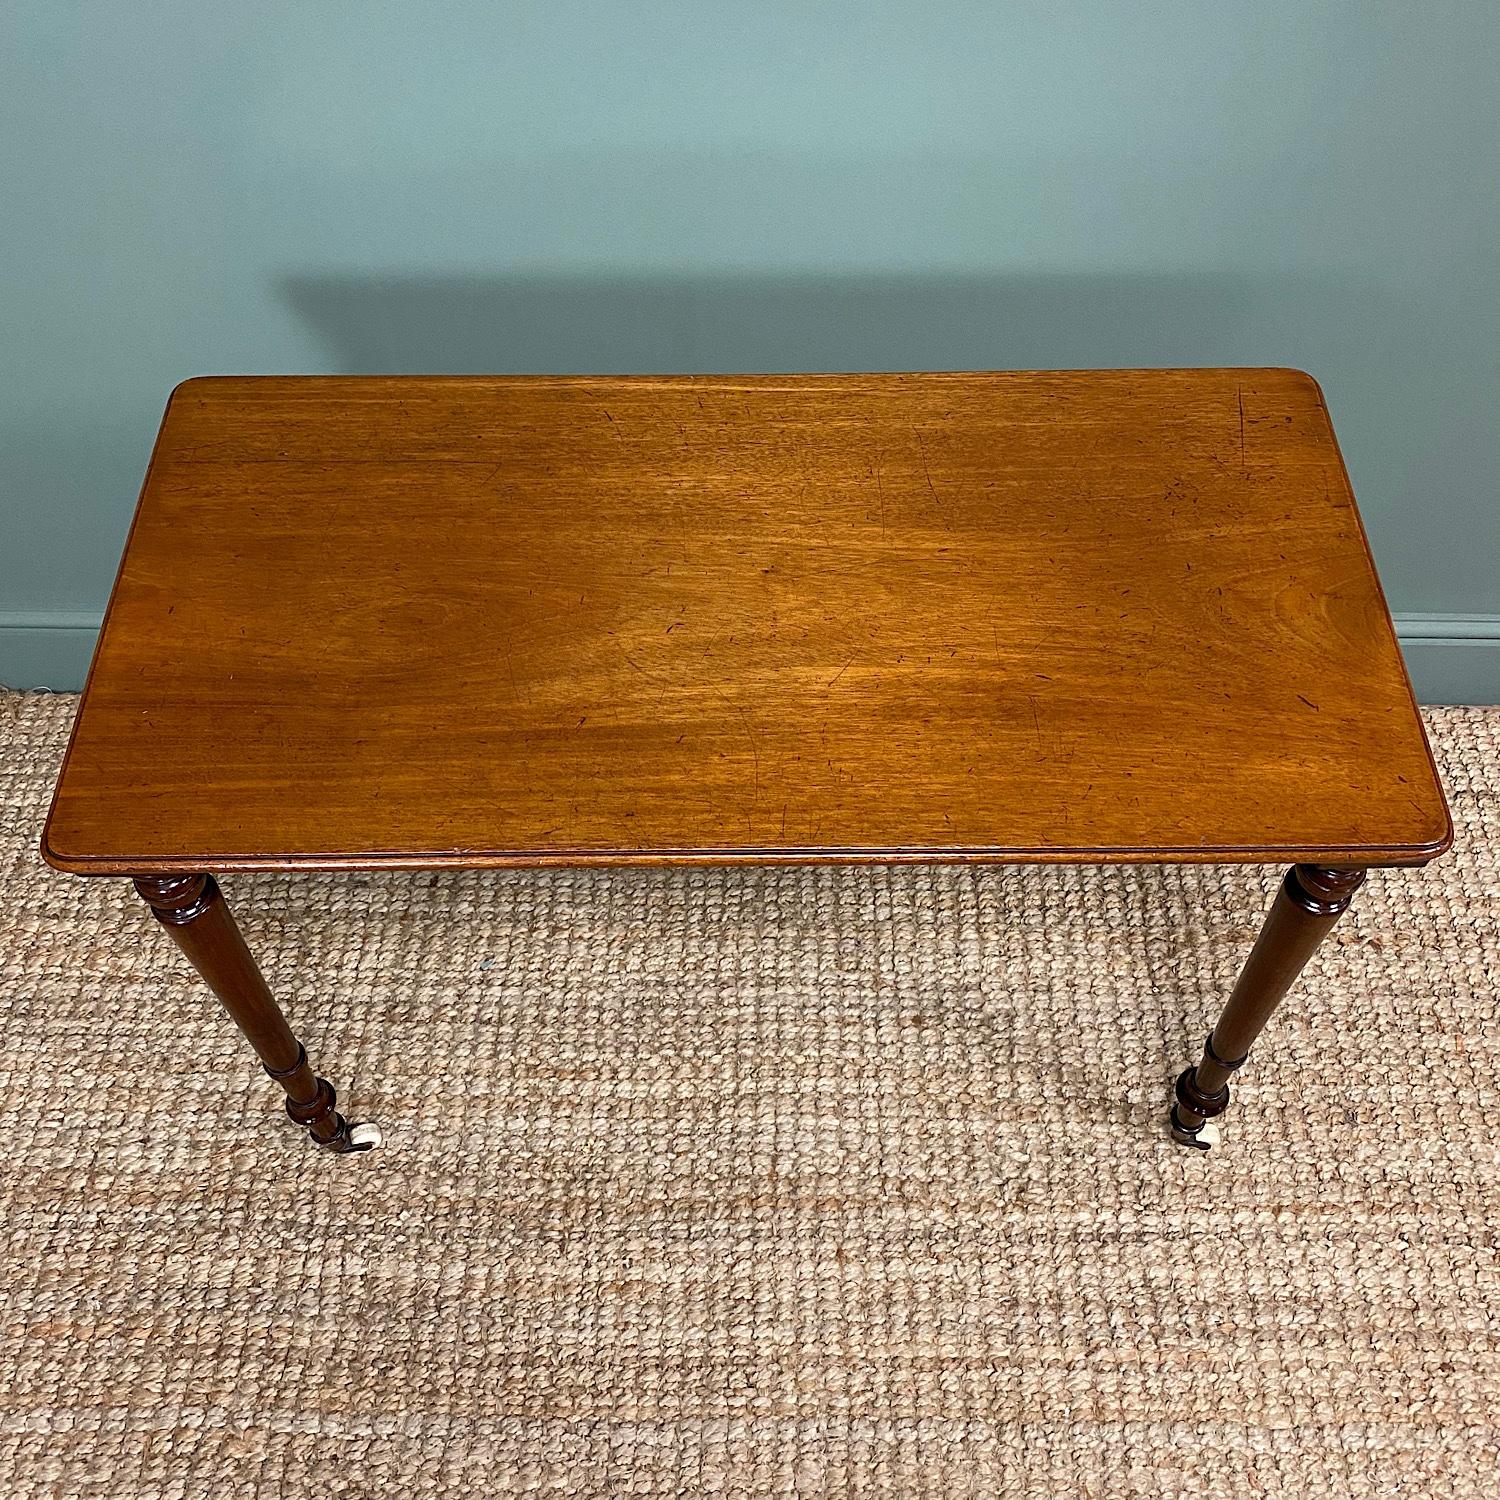 19th Century Elegant Victorian Mahogany Antique Side Stretcher Table For Sale 2